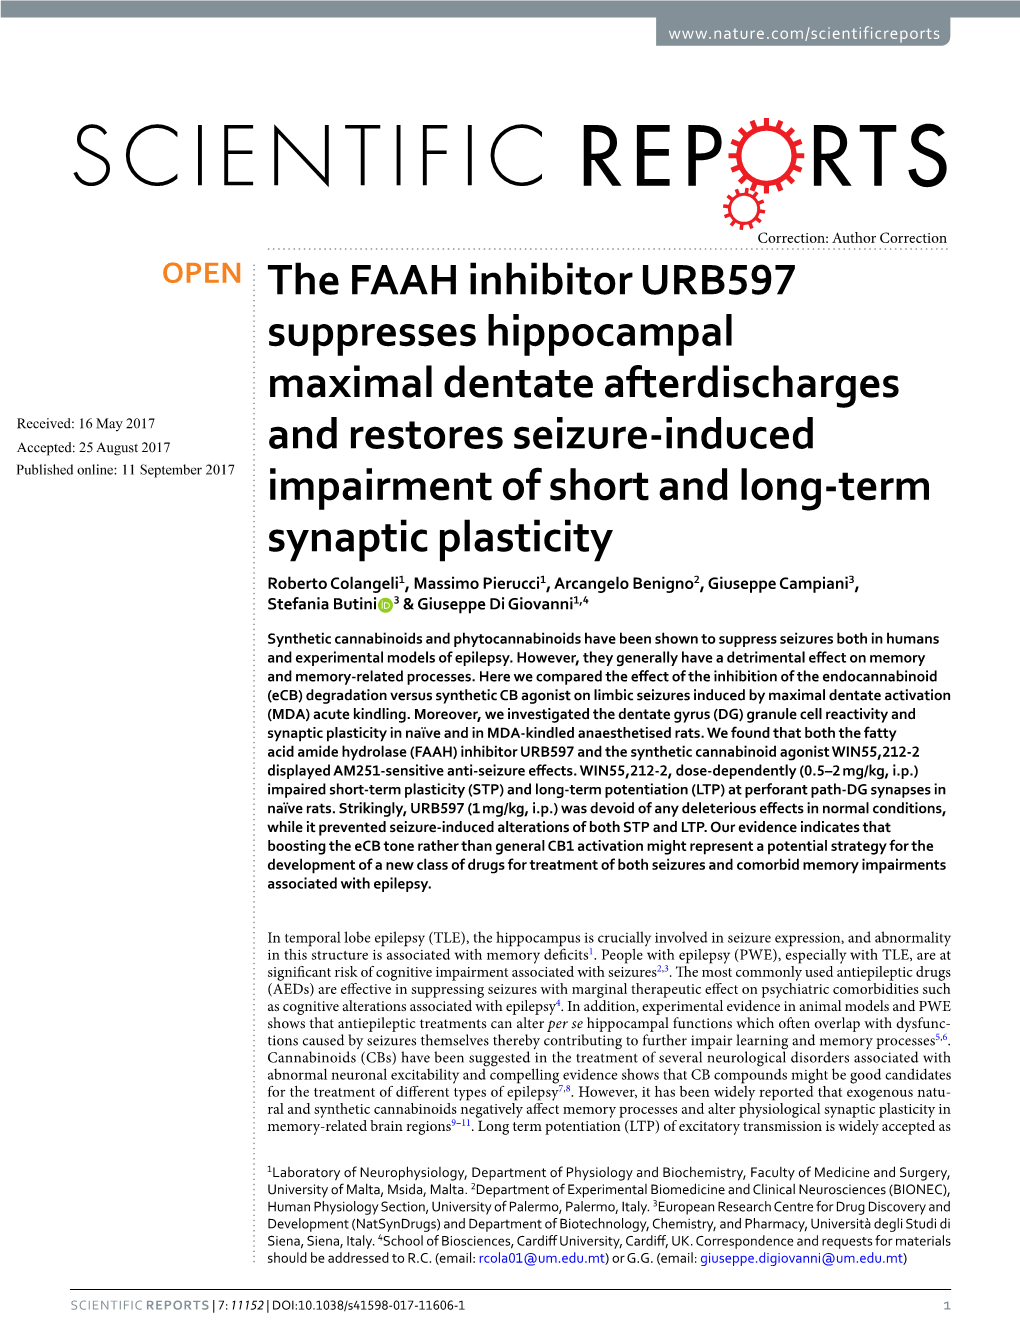 The FAAH Inhibitor URB597 Suppresses Hippocampal Maximal